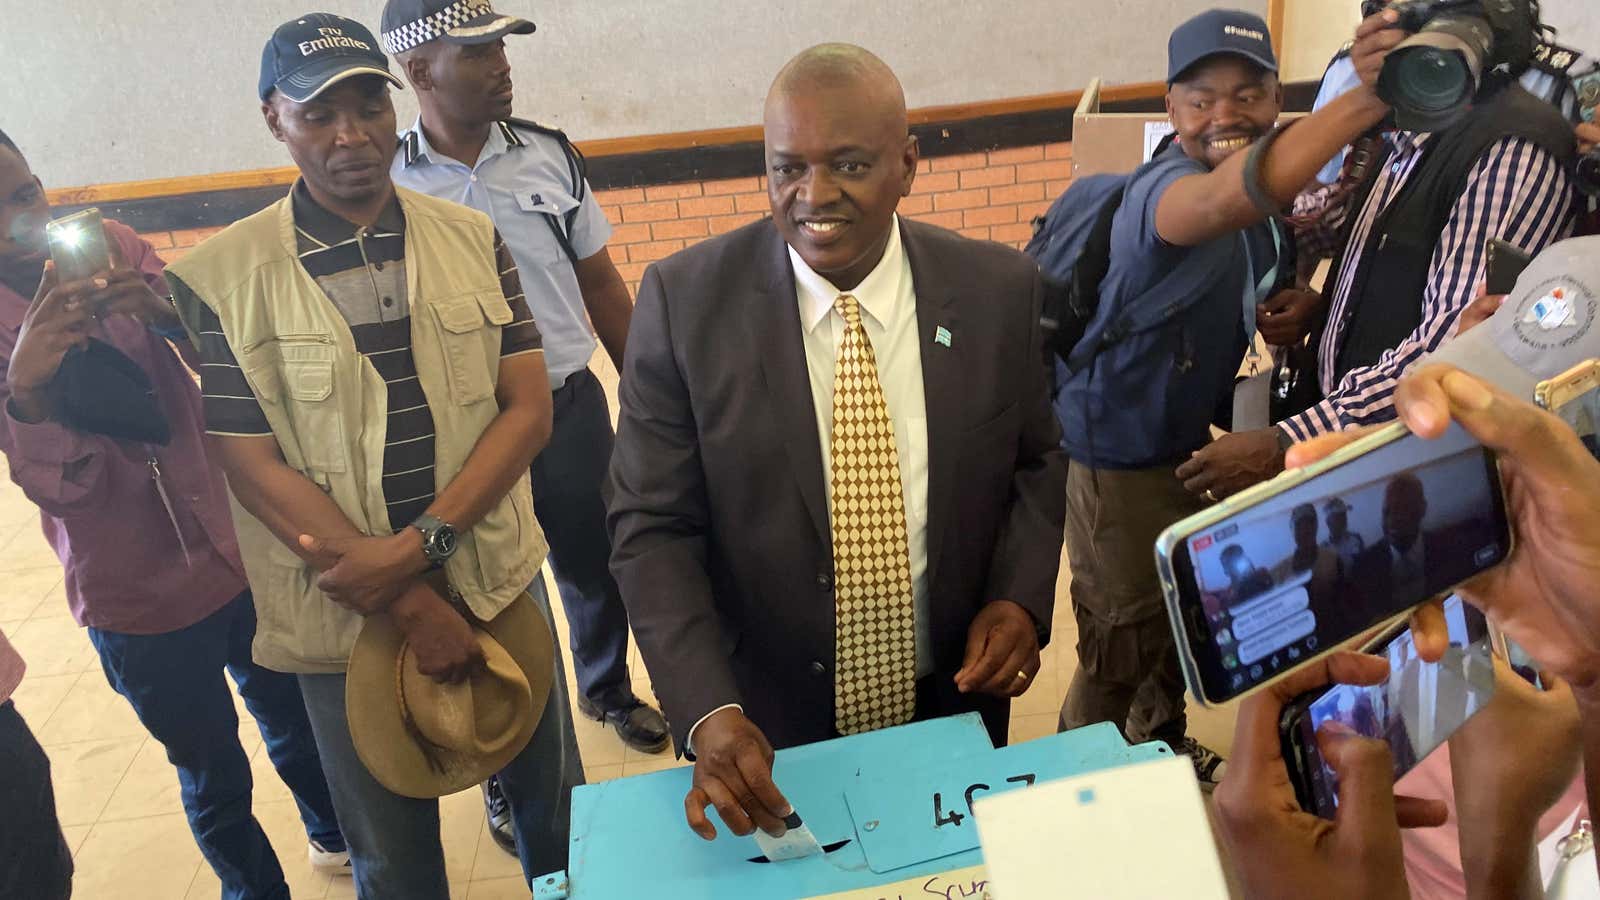 Botswana President and leader of the Botswana Democratic Party (BDP) Mokgweetsi Masisi casts his vote at his home village of Moshupa, Oct. 23, 2019.